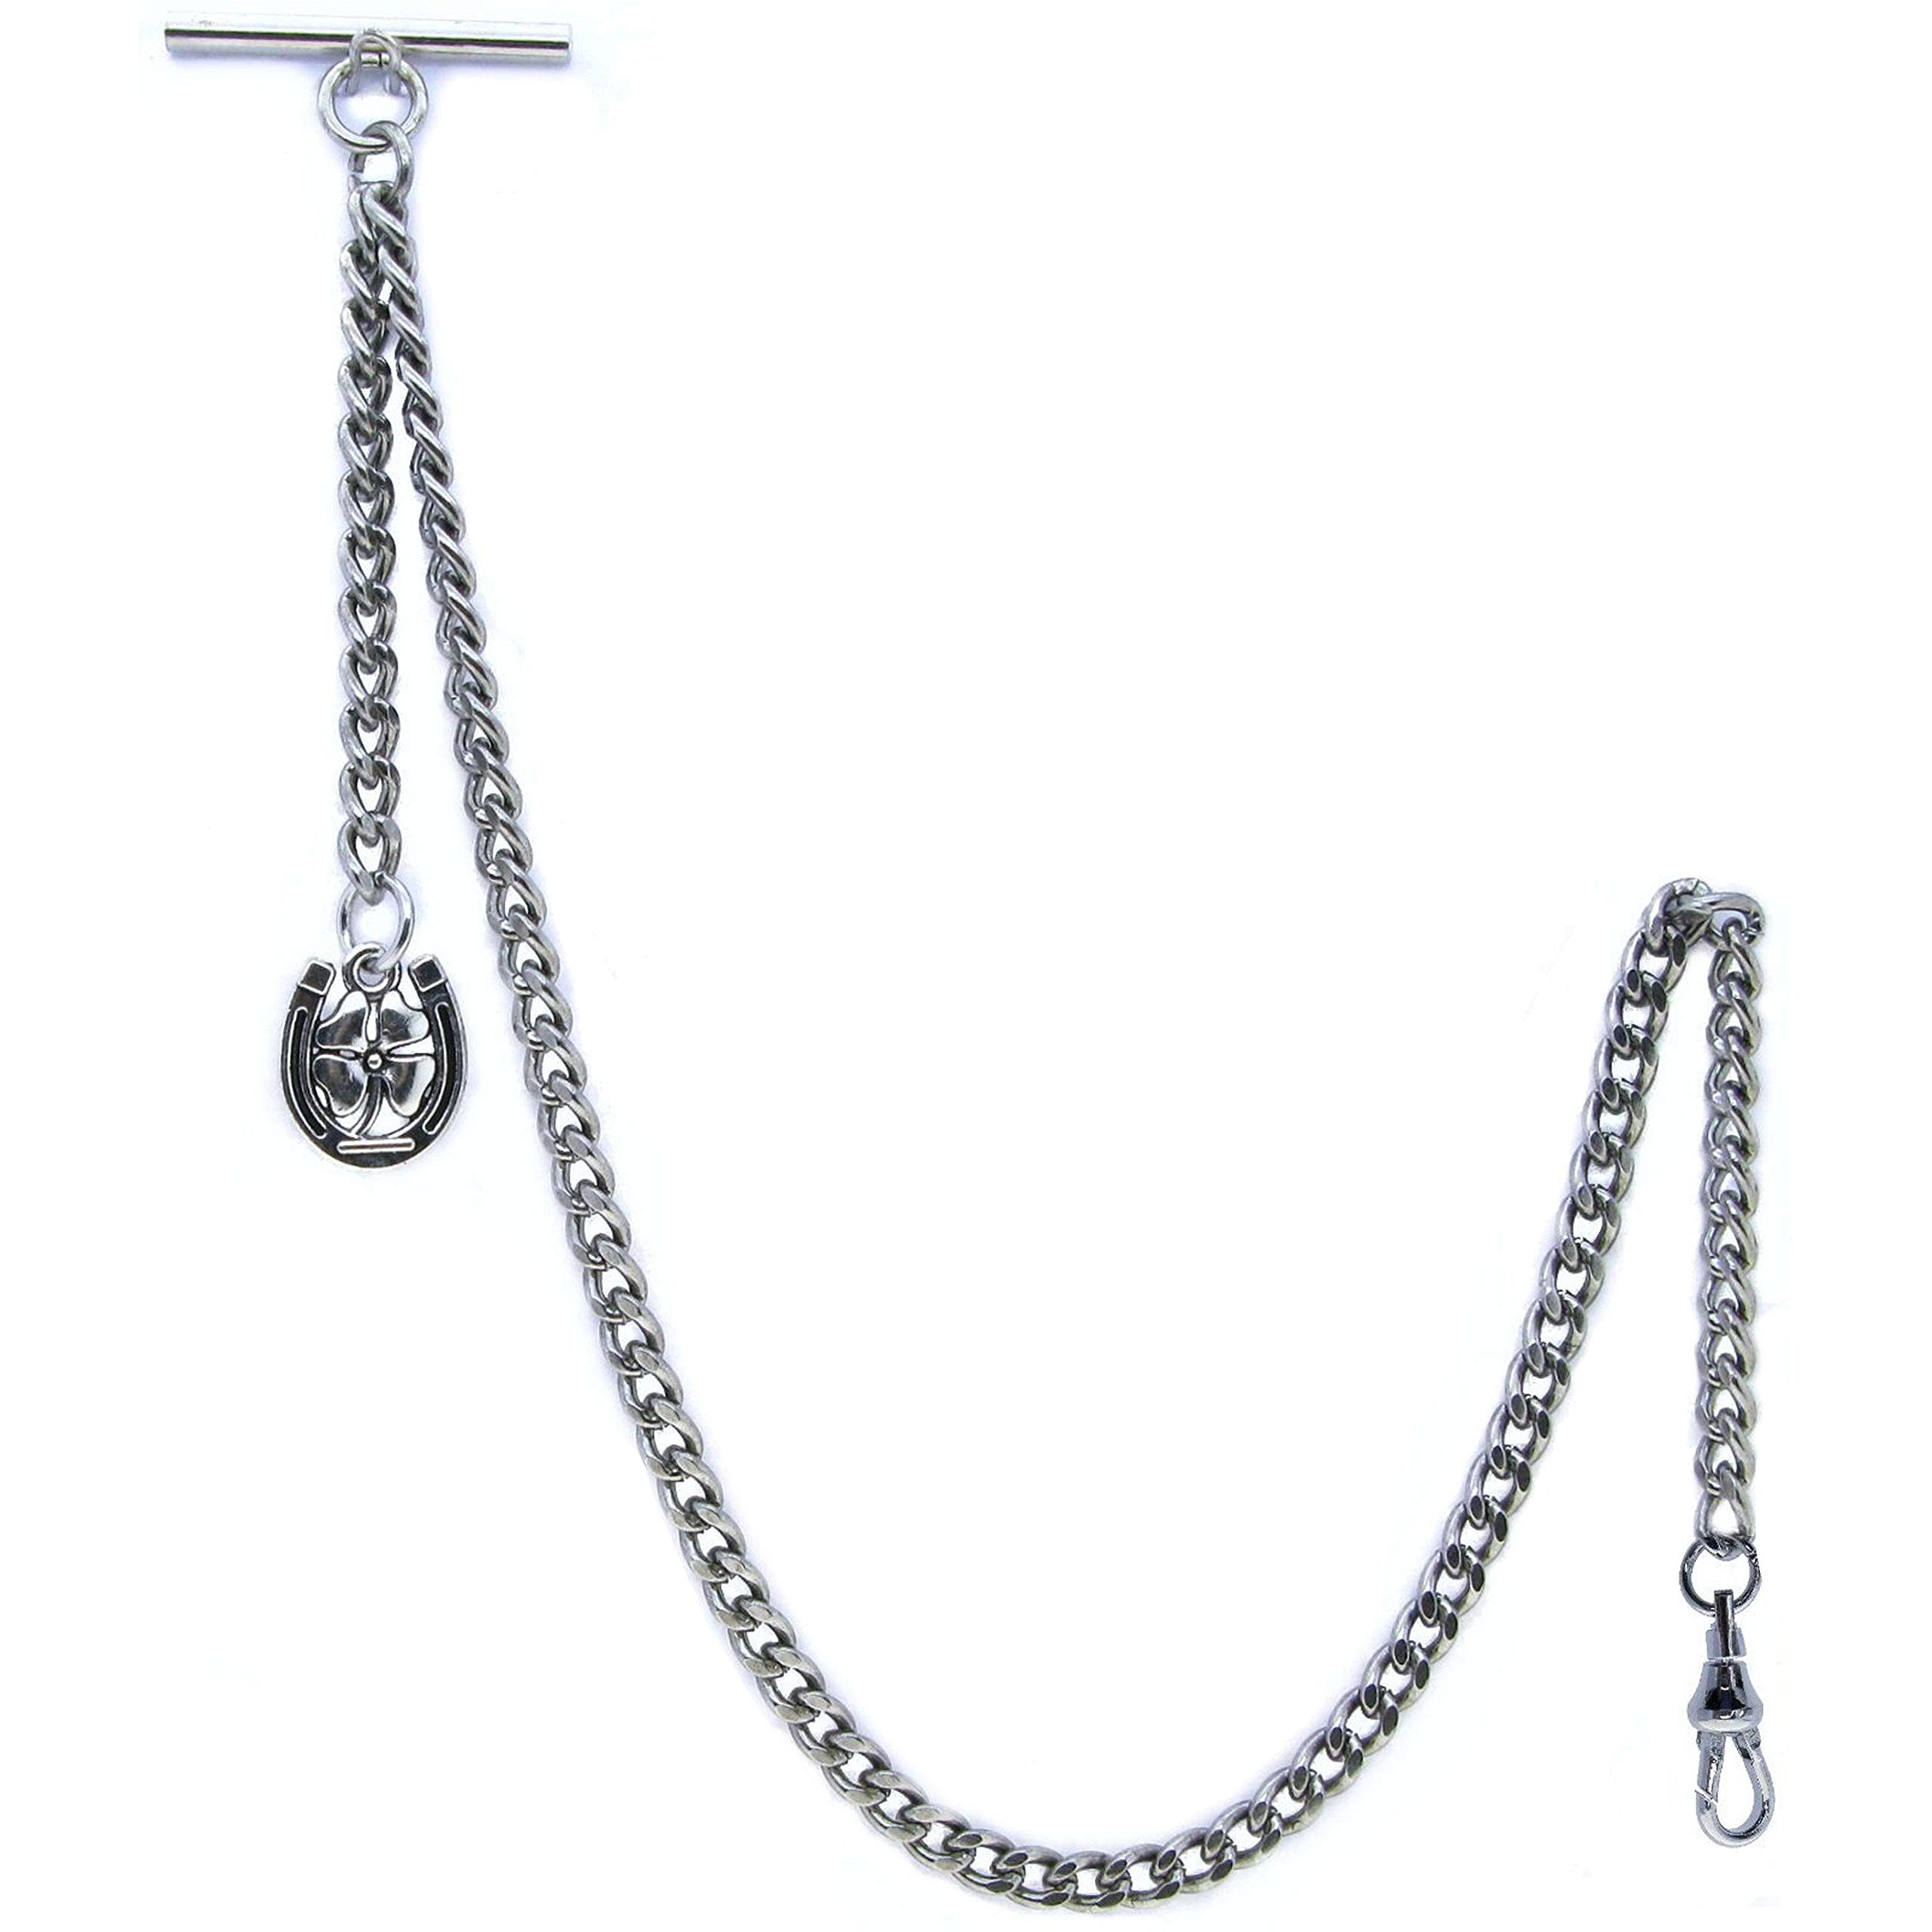 Albert Chain Silver Color Pocket Watch Chains for Men with Lucky Four-Leaf Clover Design Fob T Bar AC69